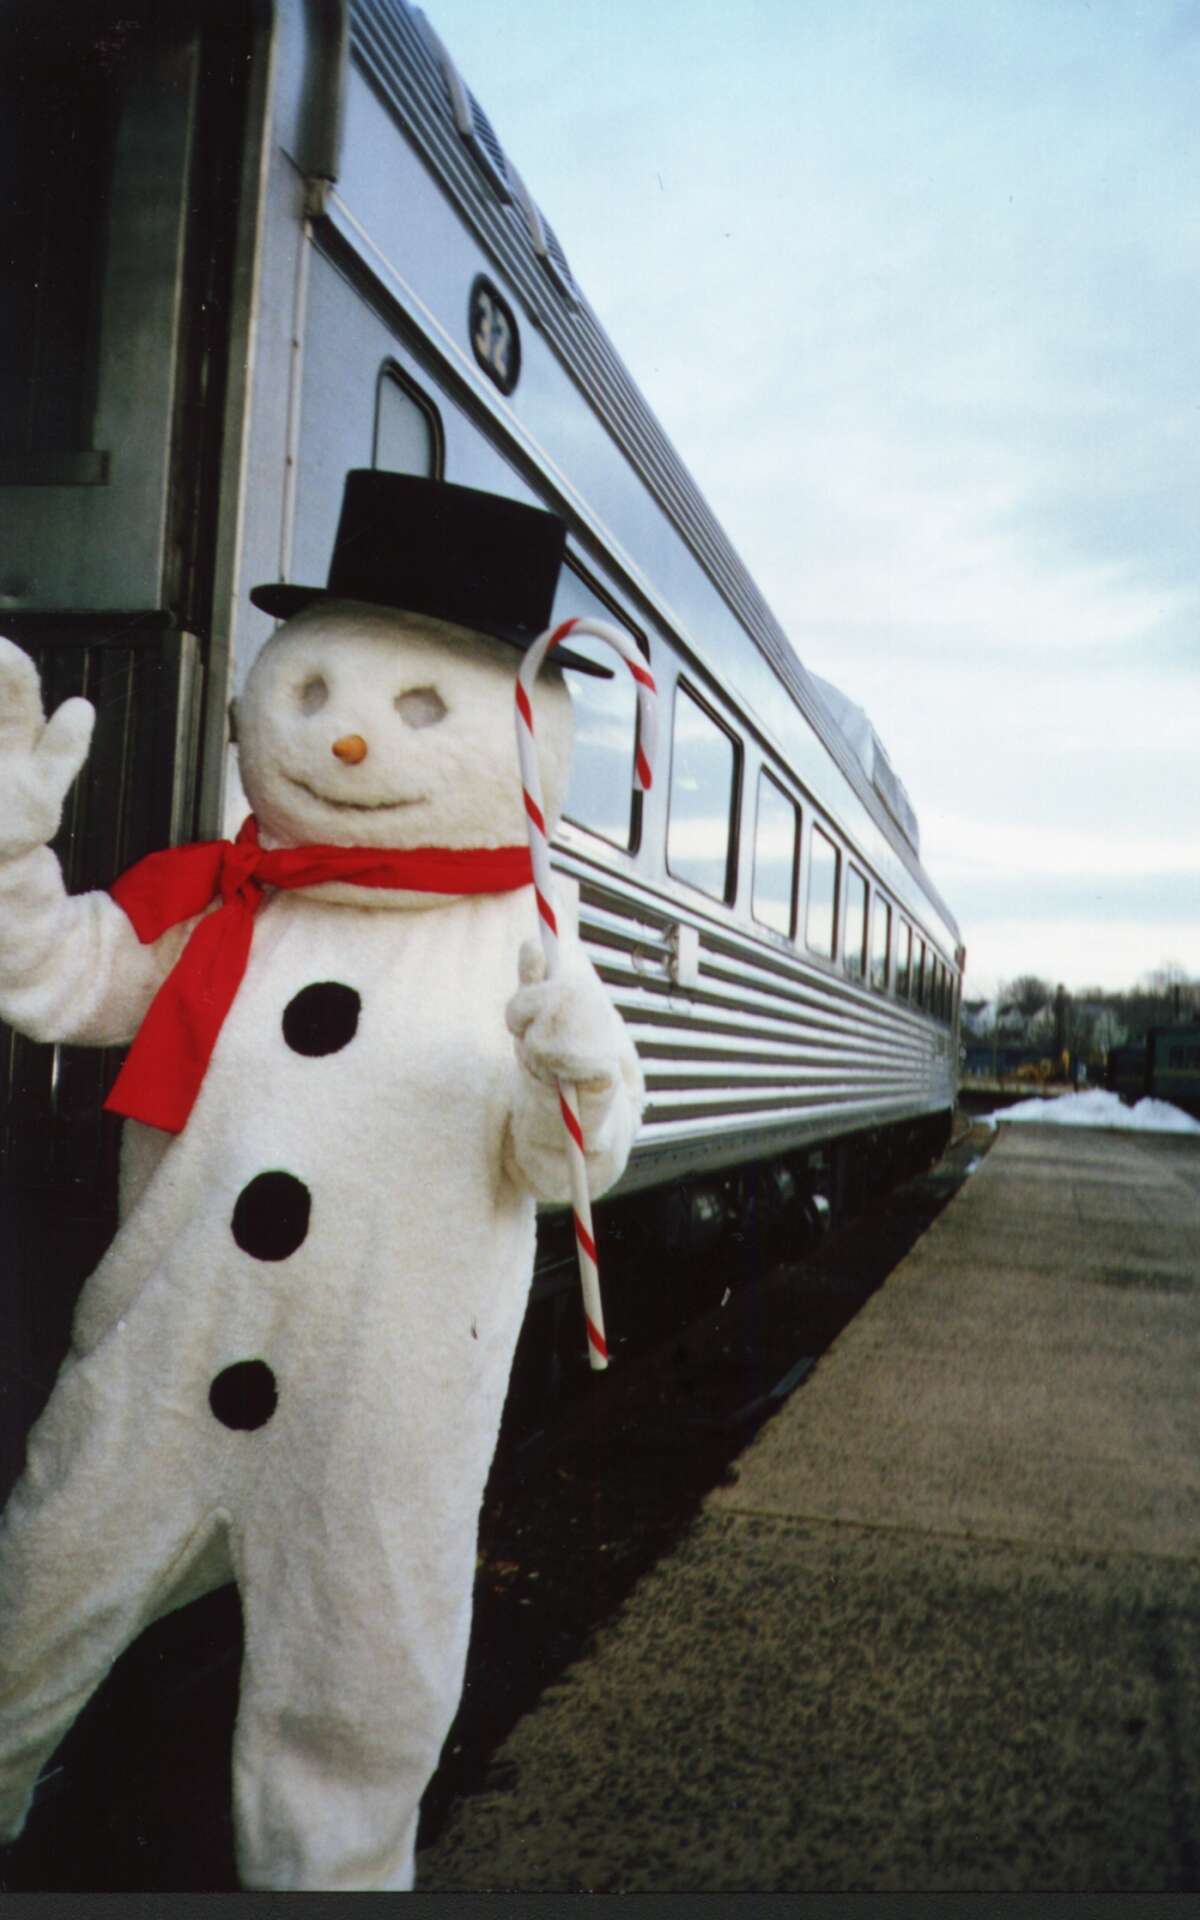 Take a ride with Santa in a fully-restored 1953 New Haven Railroad Rail Diesel Car at the Danbury Railroad Museum. Trains will depart every half-hour Saturday and Sunday. Find out more.